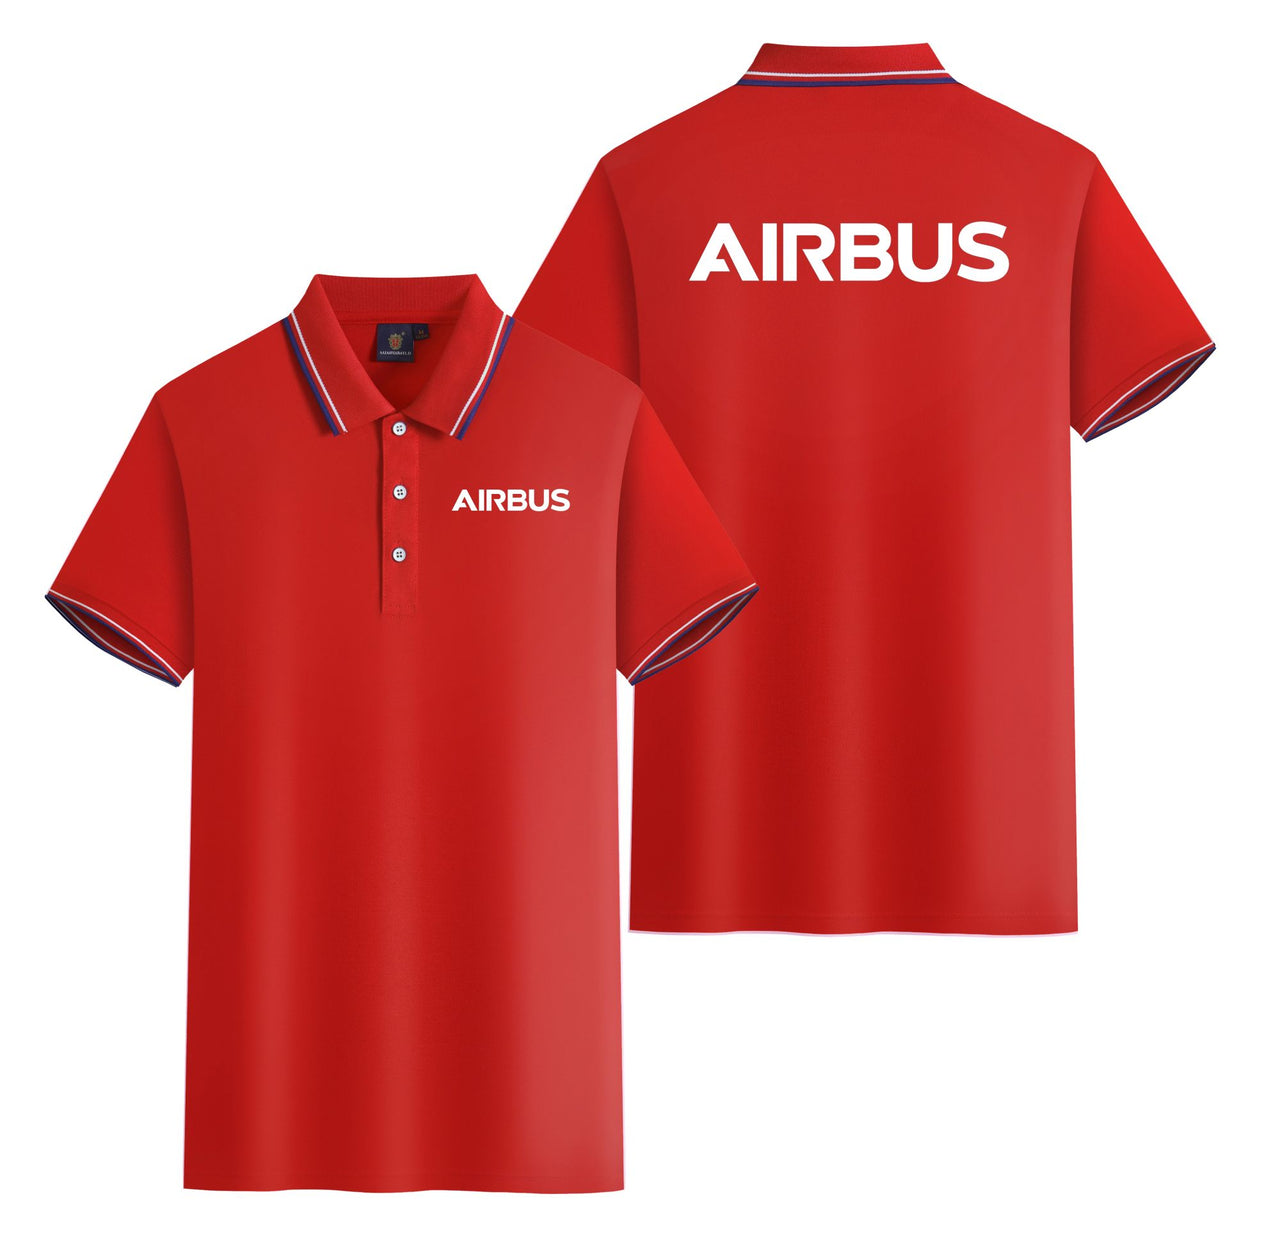 Airbus & Text Designed Stylish Polo T-Shirts (Double-Side)